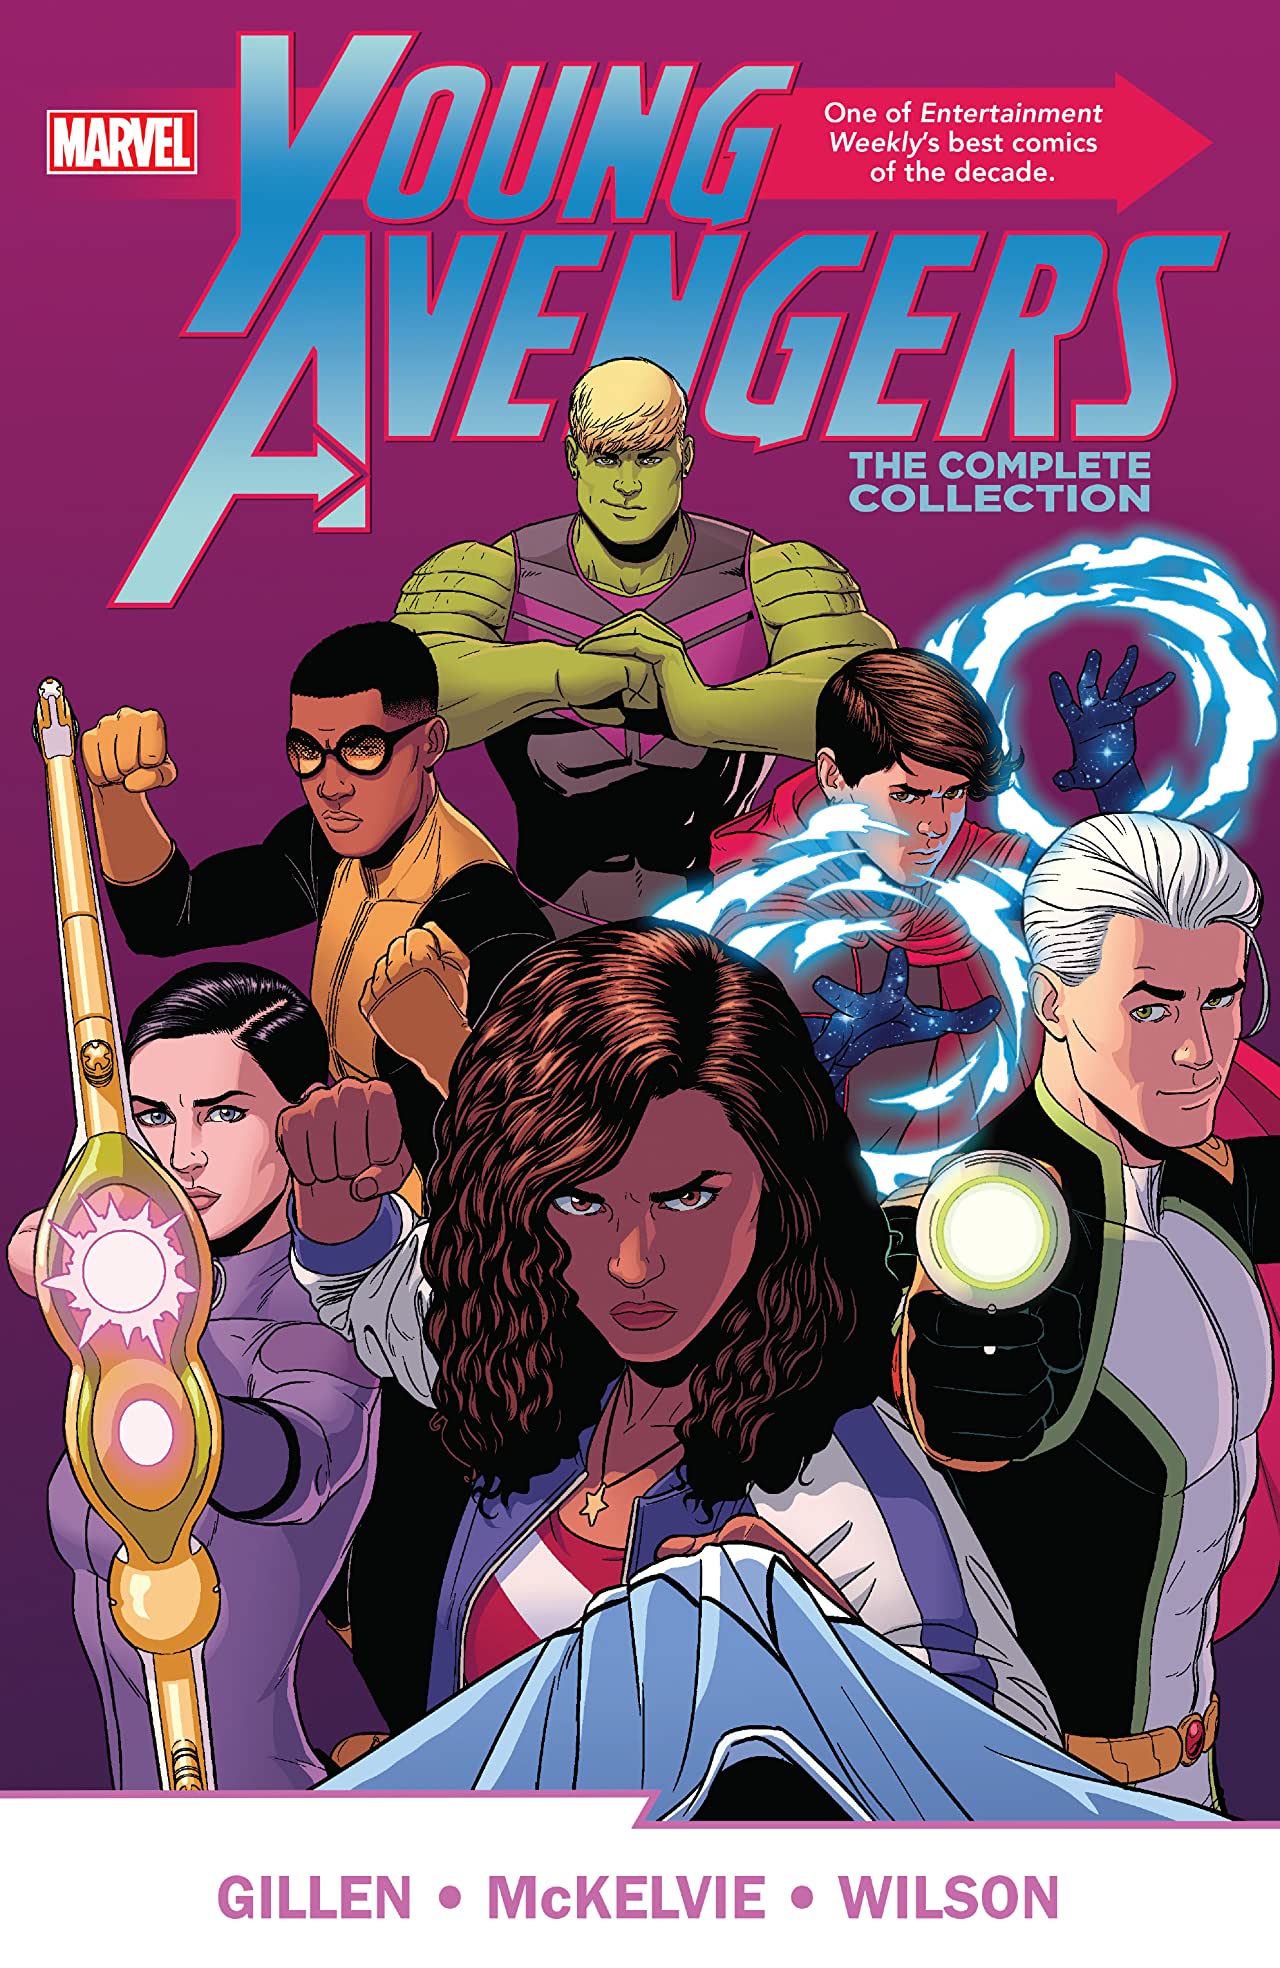 Young Avengers (2013) by Kieron Gillen and Jamie McKelvie - The Complete Collection